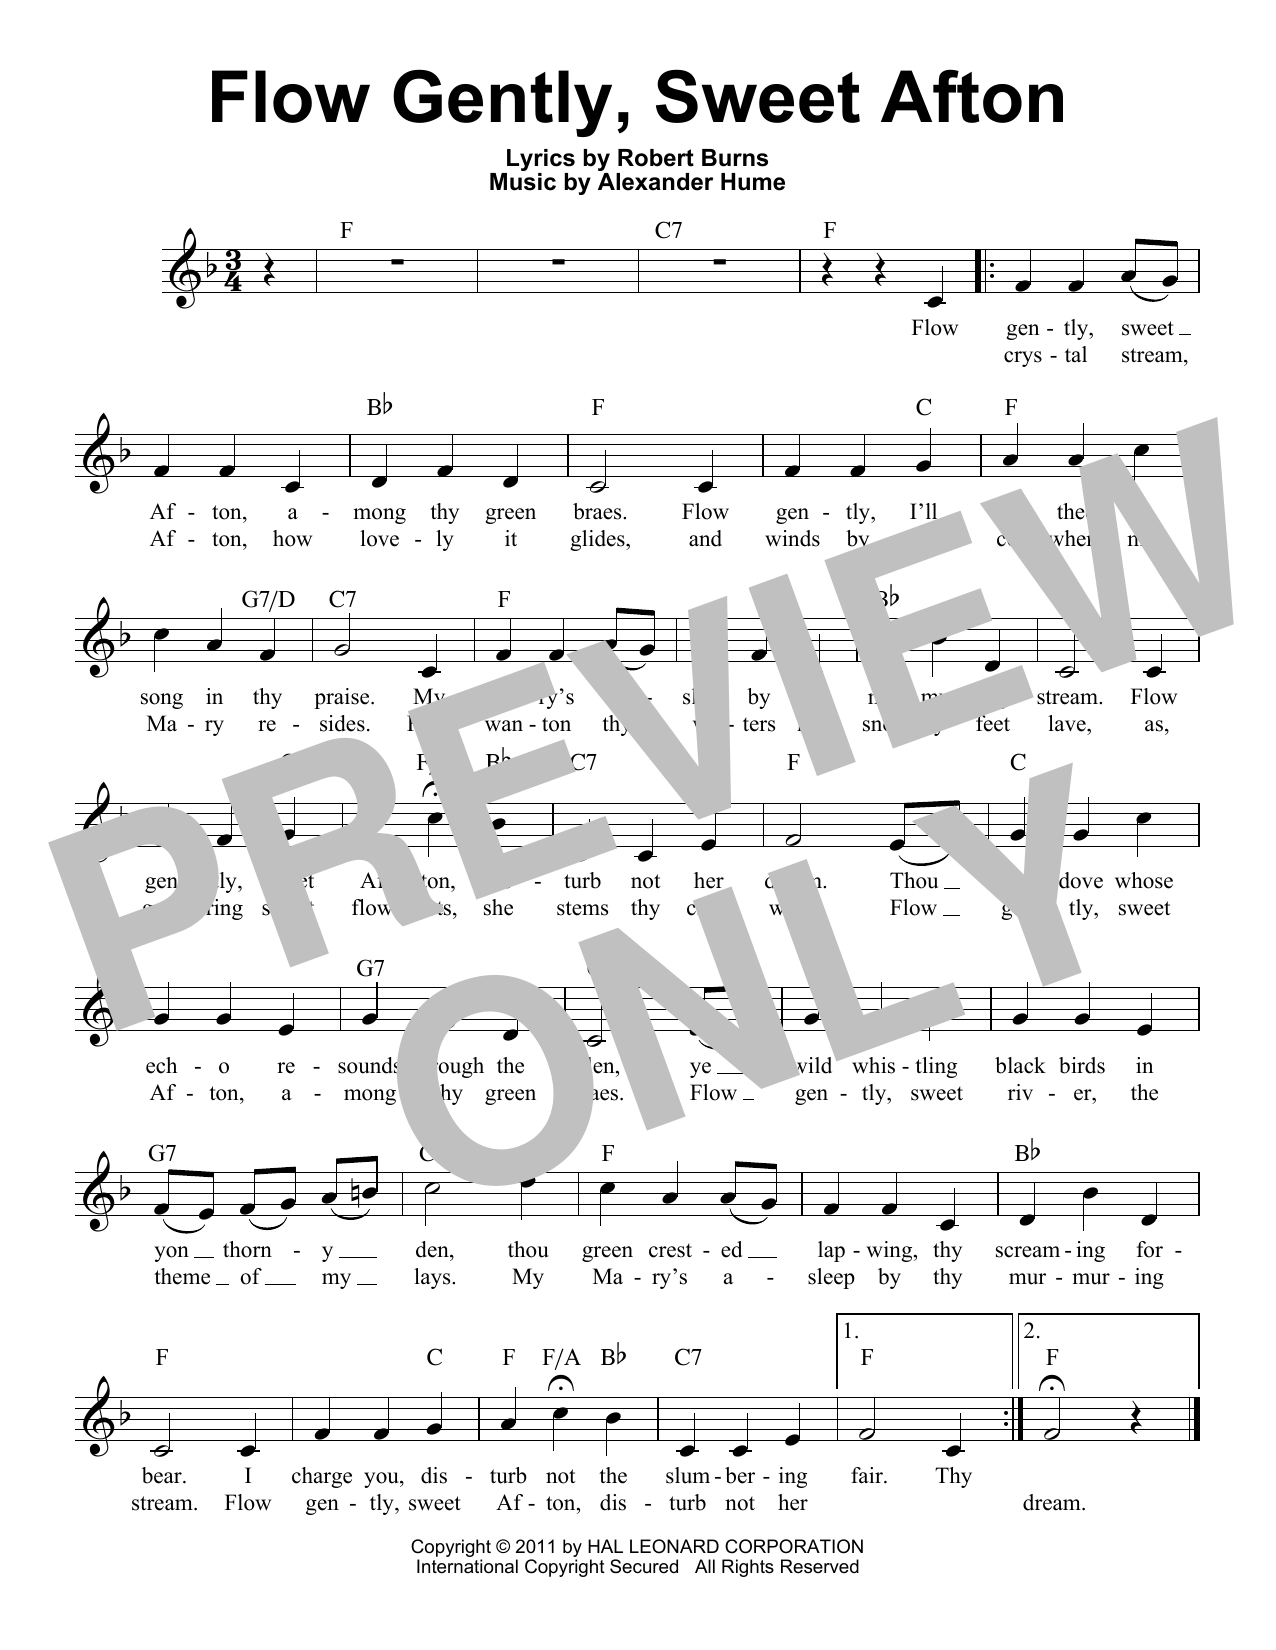 Alexander Hume Flow Gently, Sweet Afton sheet music notes and chords. Download Printable PDF.